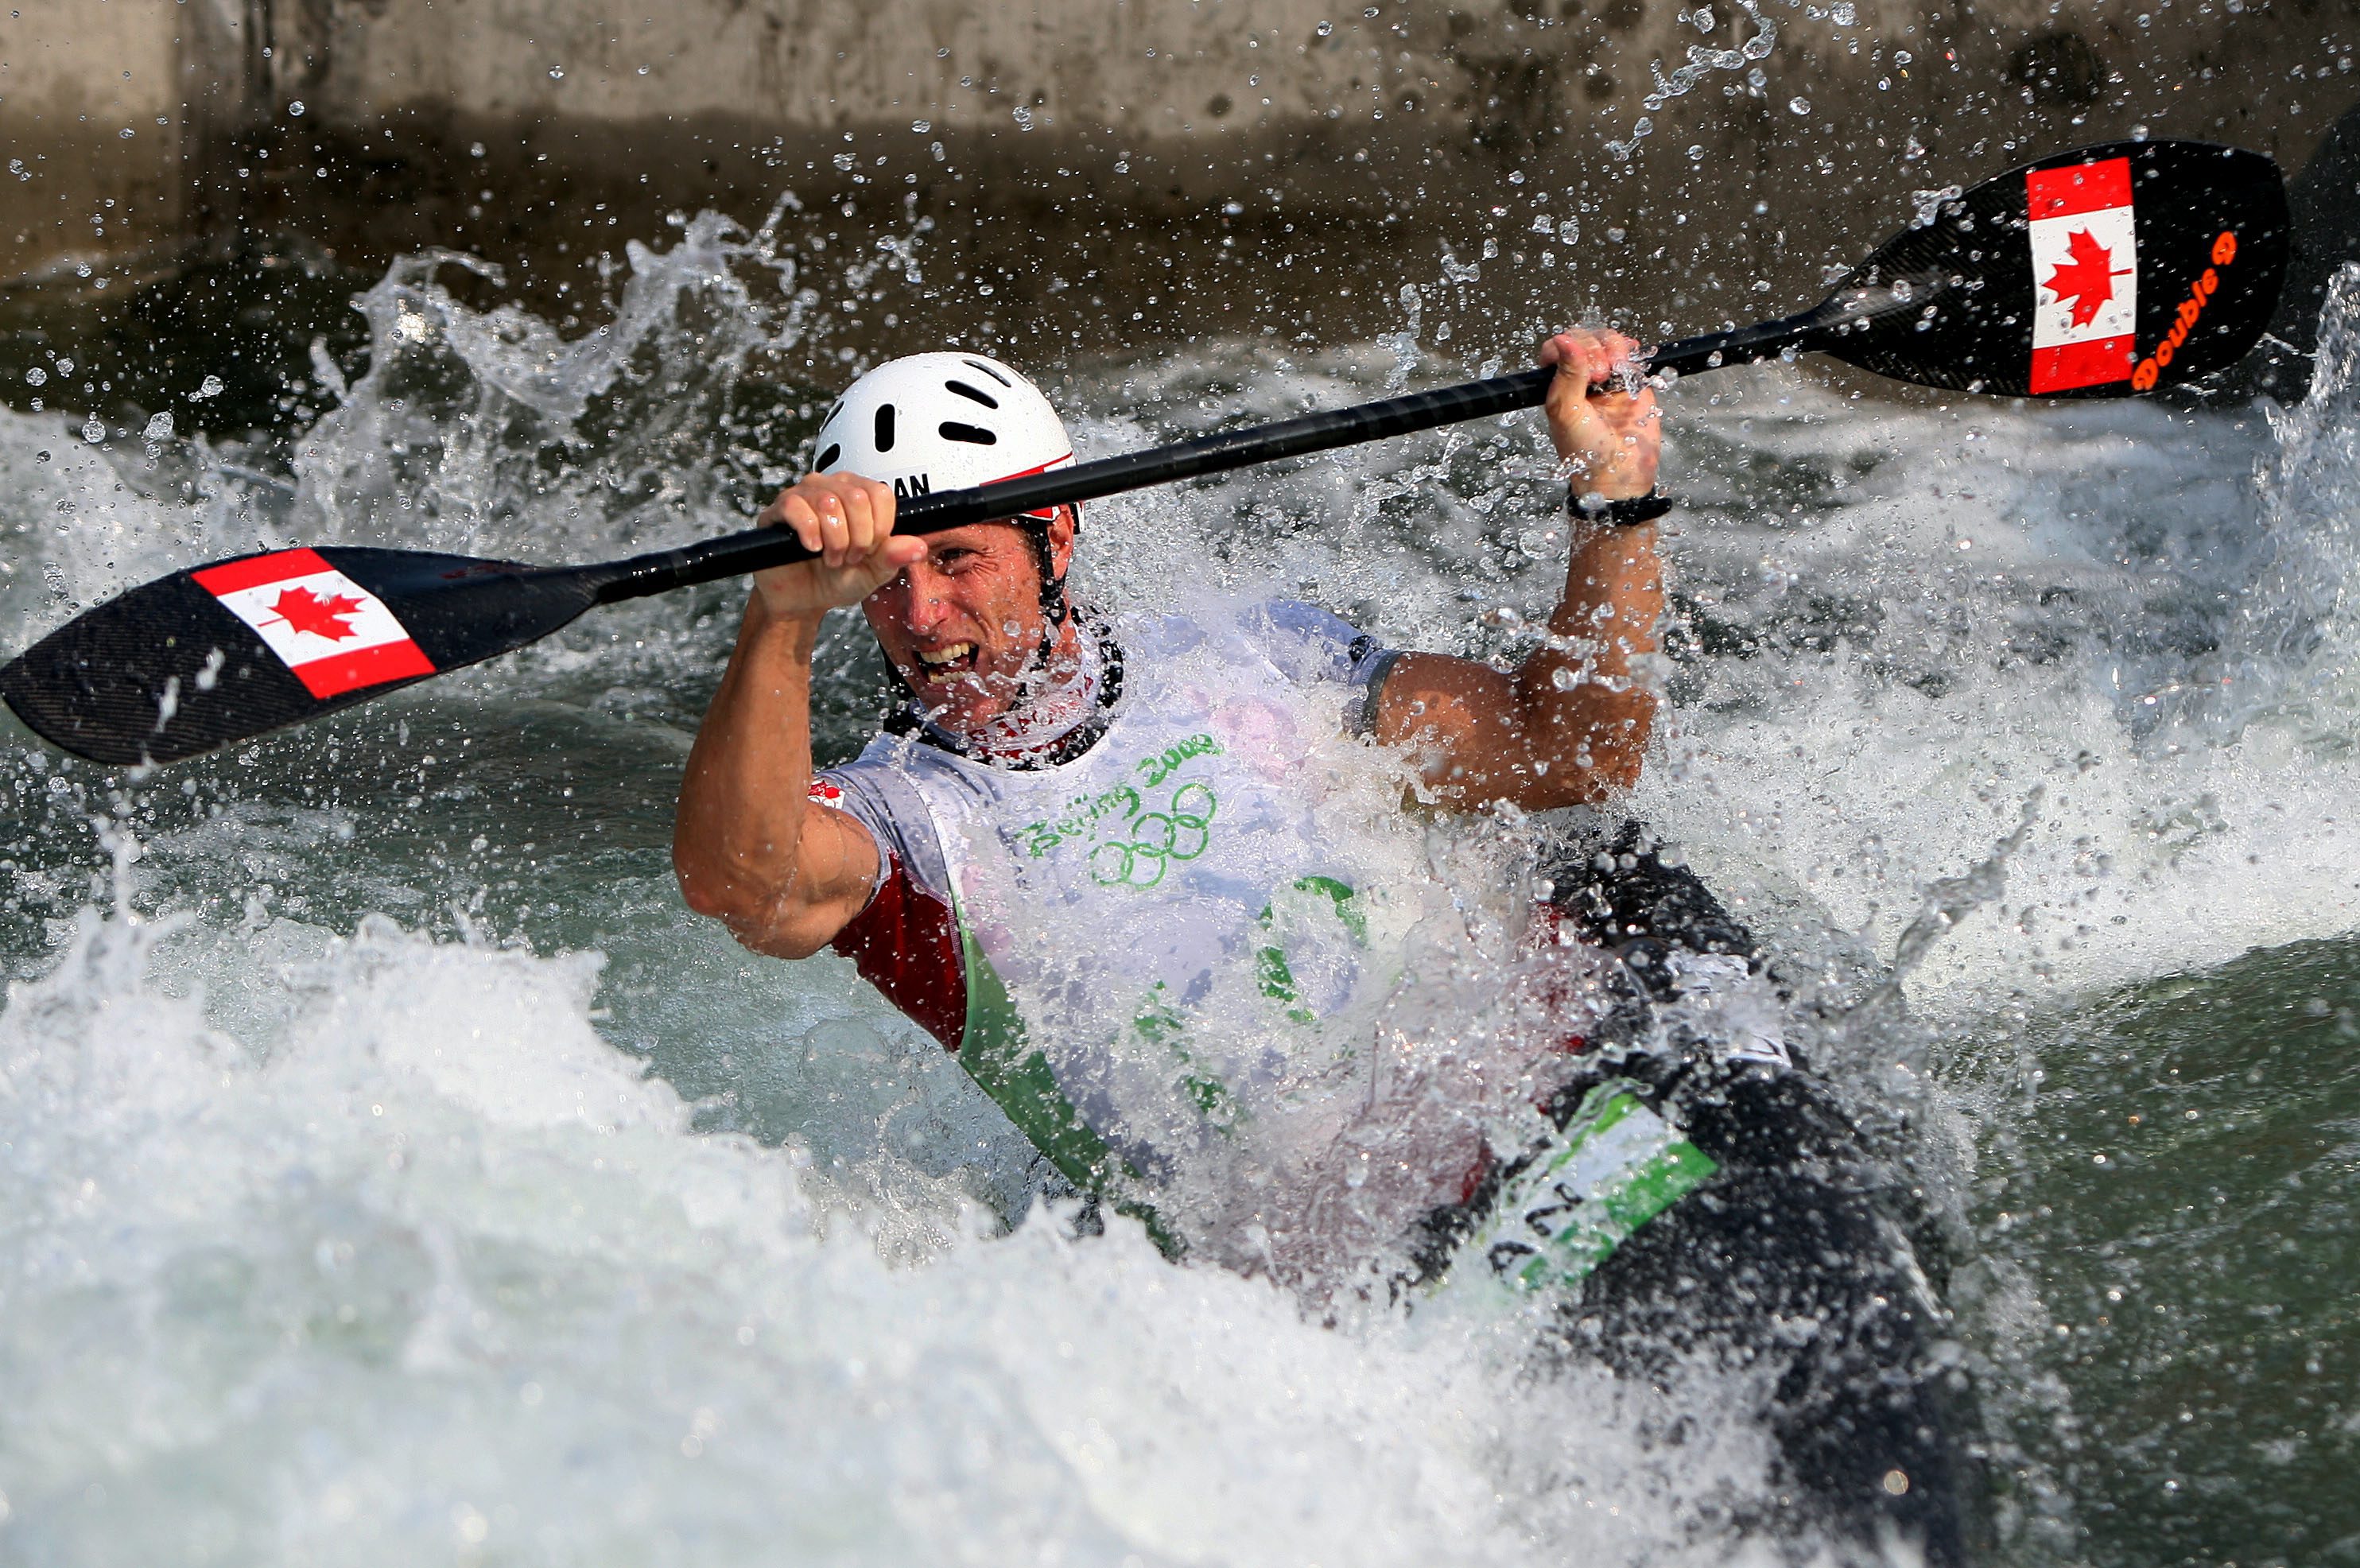 A slalom kayaker races through whitewater